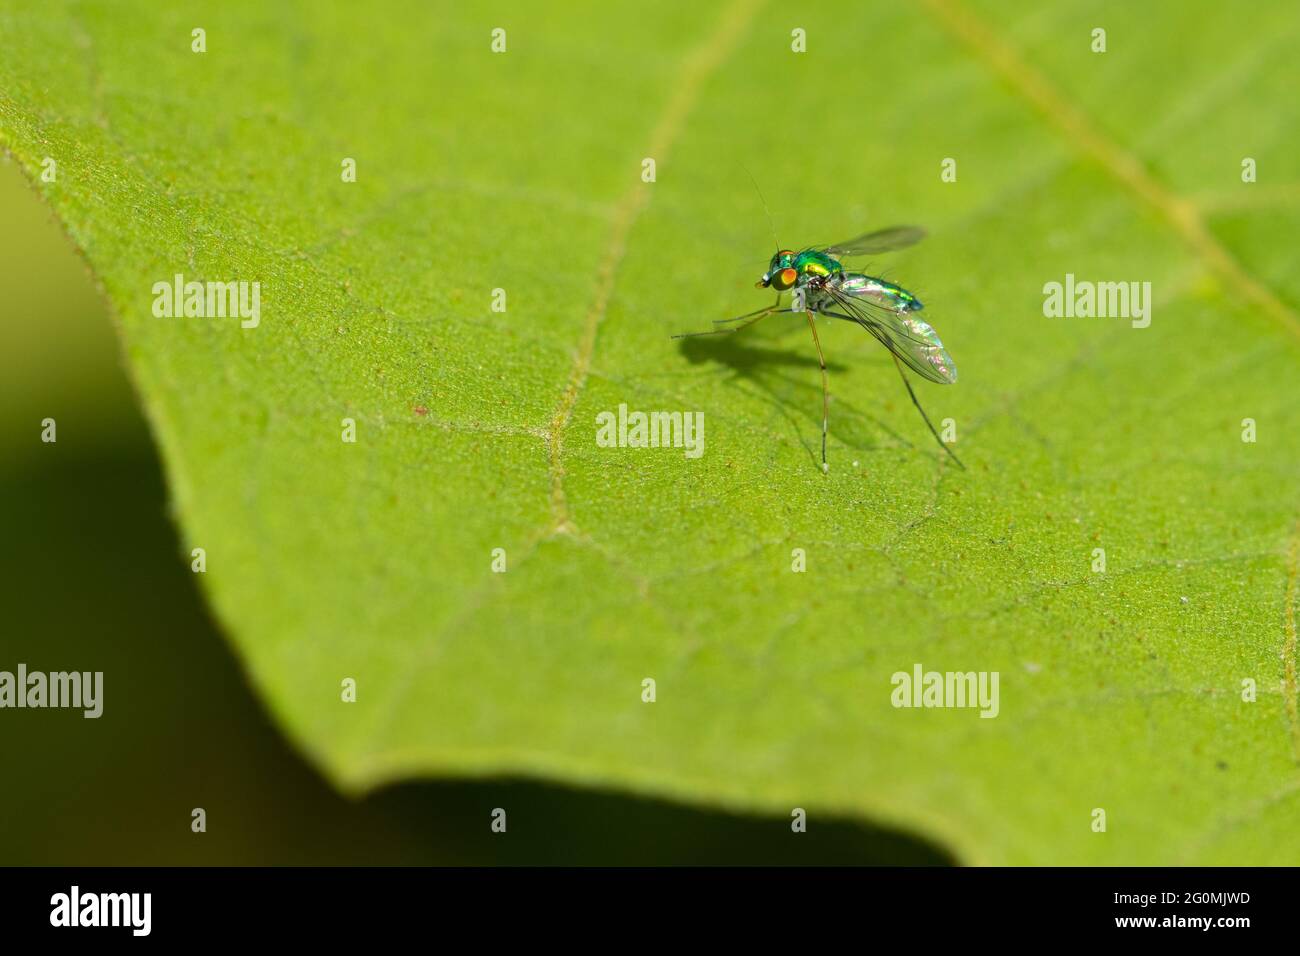 Selective focus image of a long legged fly siting on a green leaf Stock Photo